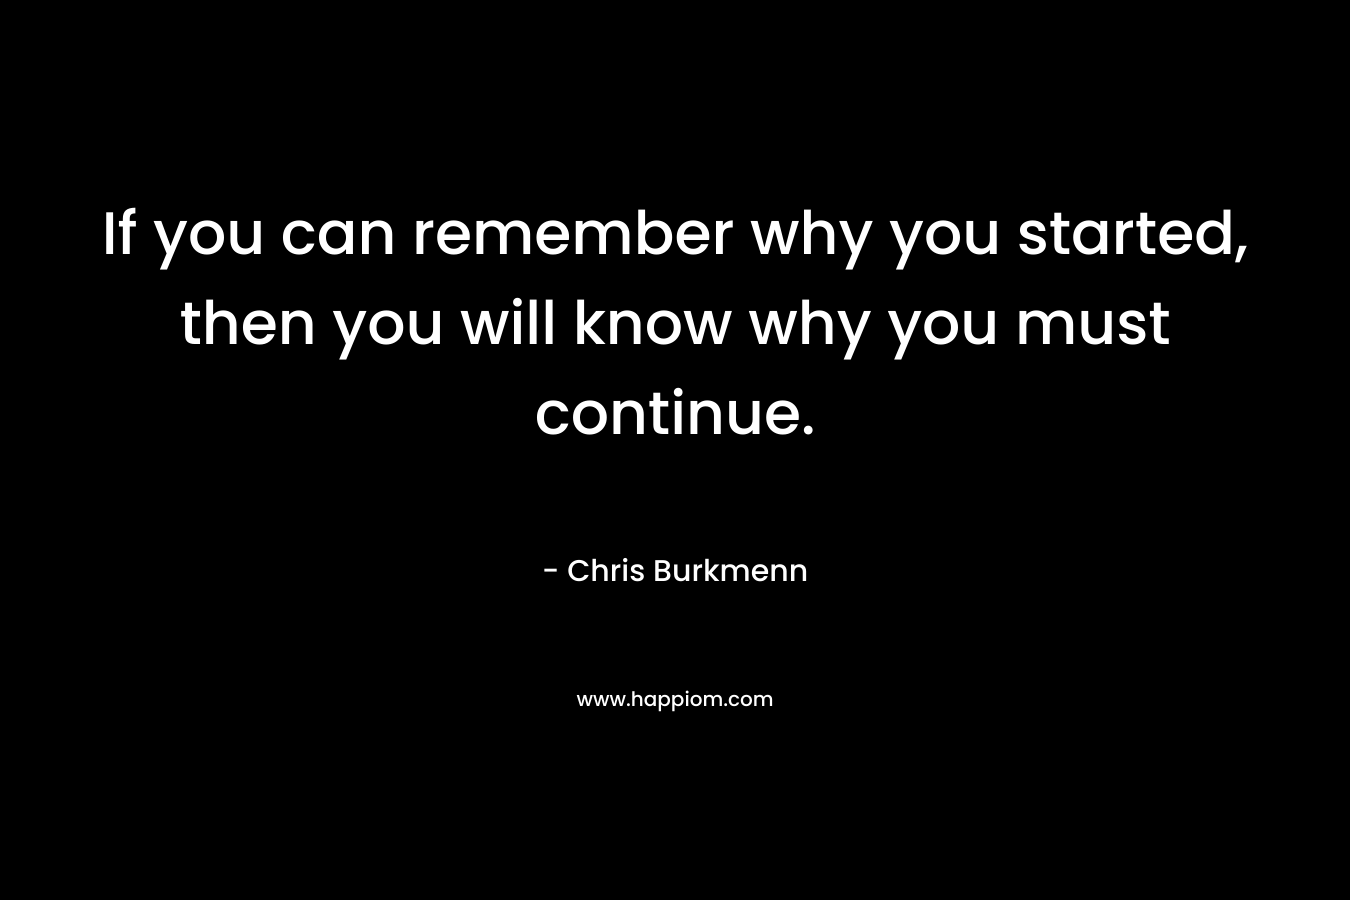 If you can remember why you started, then you will know why you must continue.